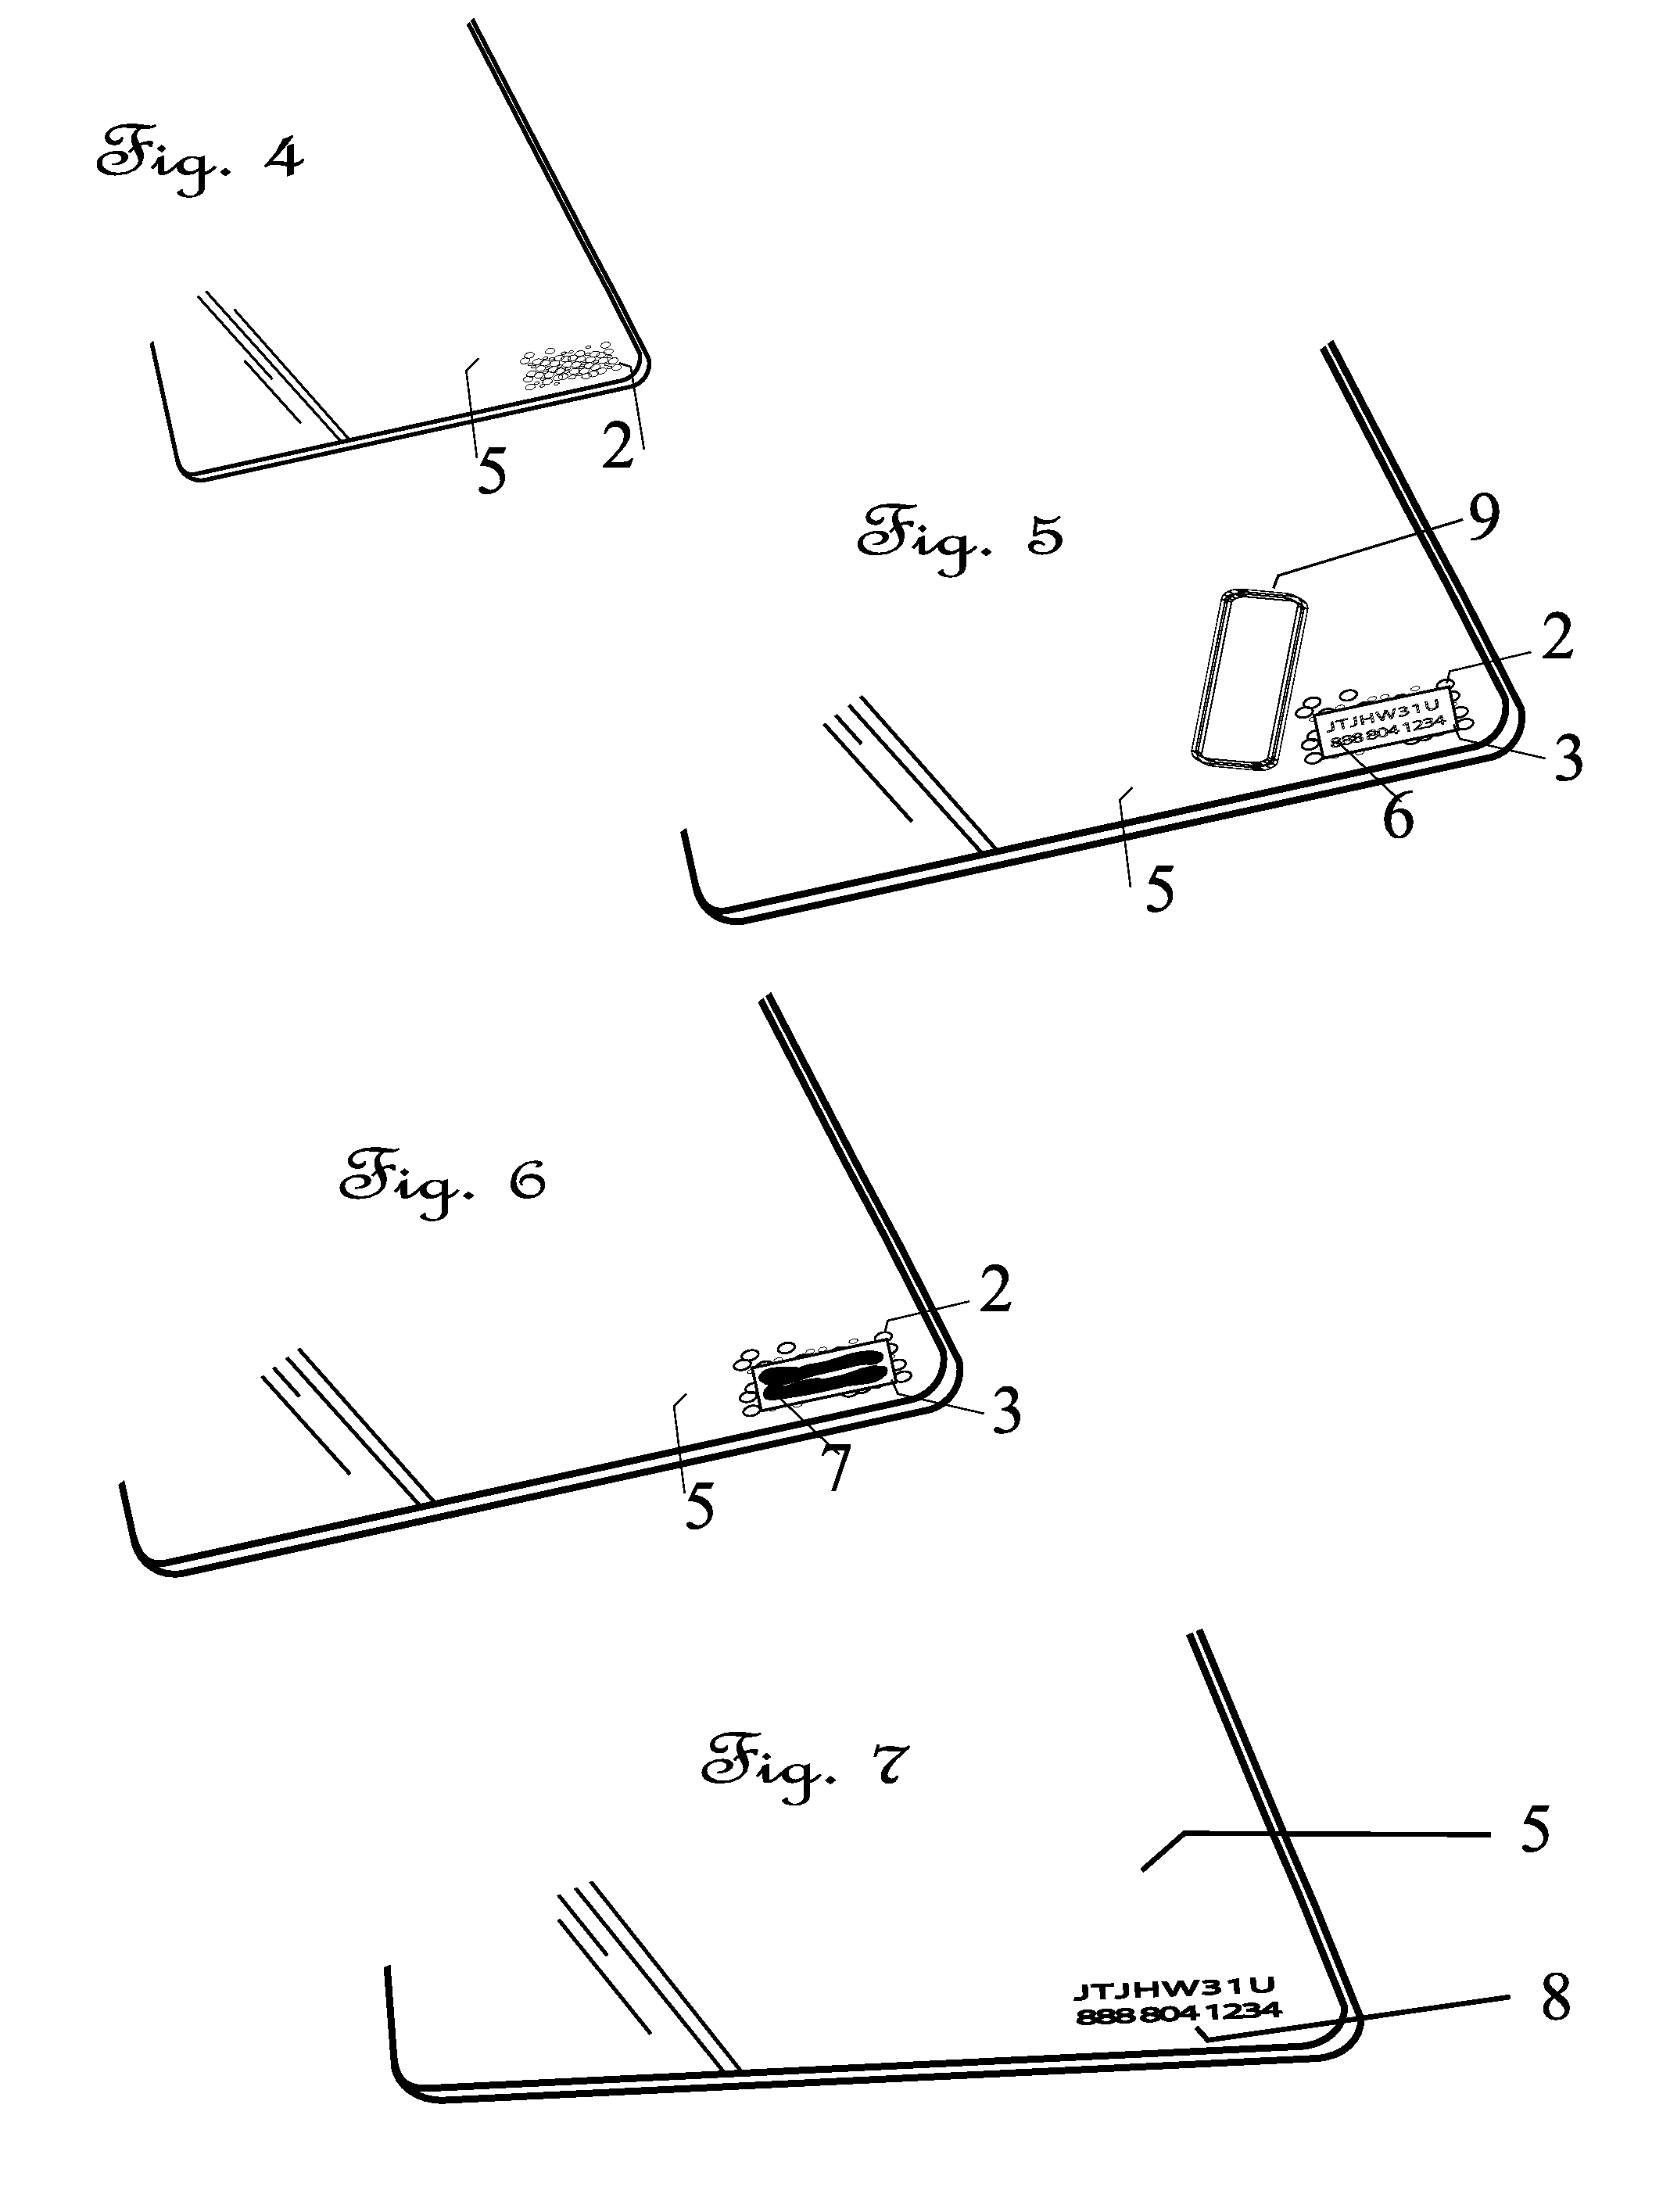 Process to attach thermal stencils to a glass substrate and permanently etch a mark therein